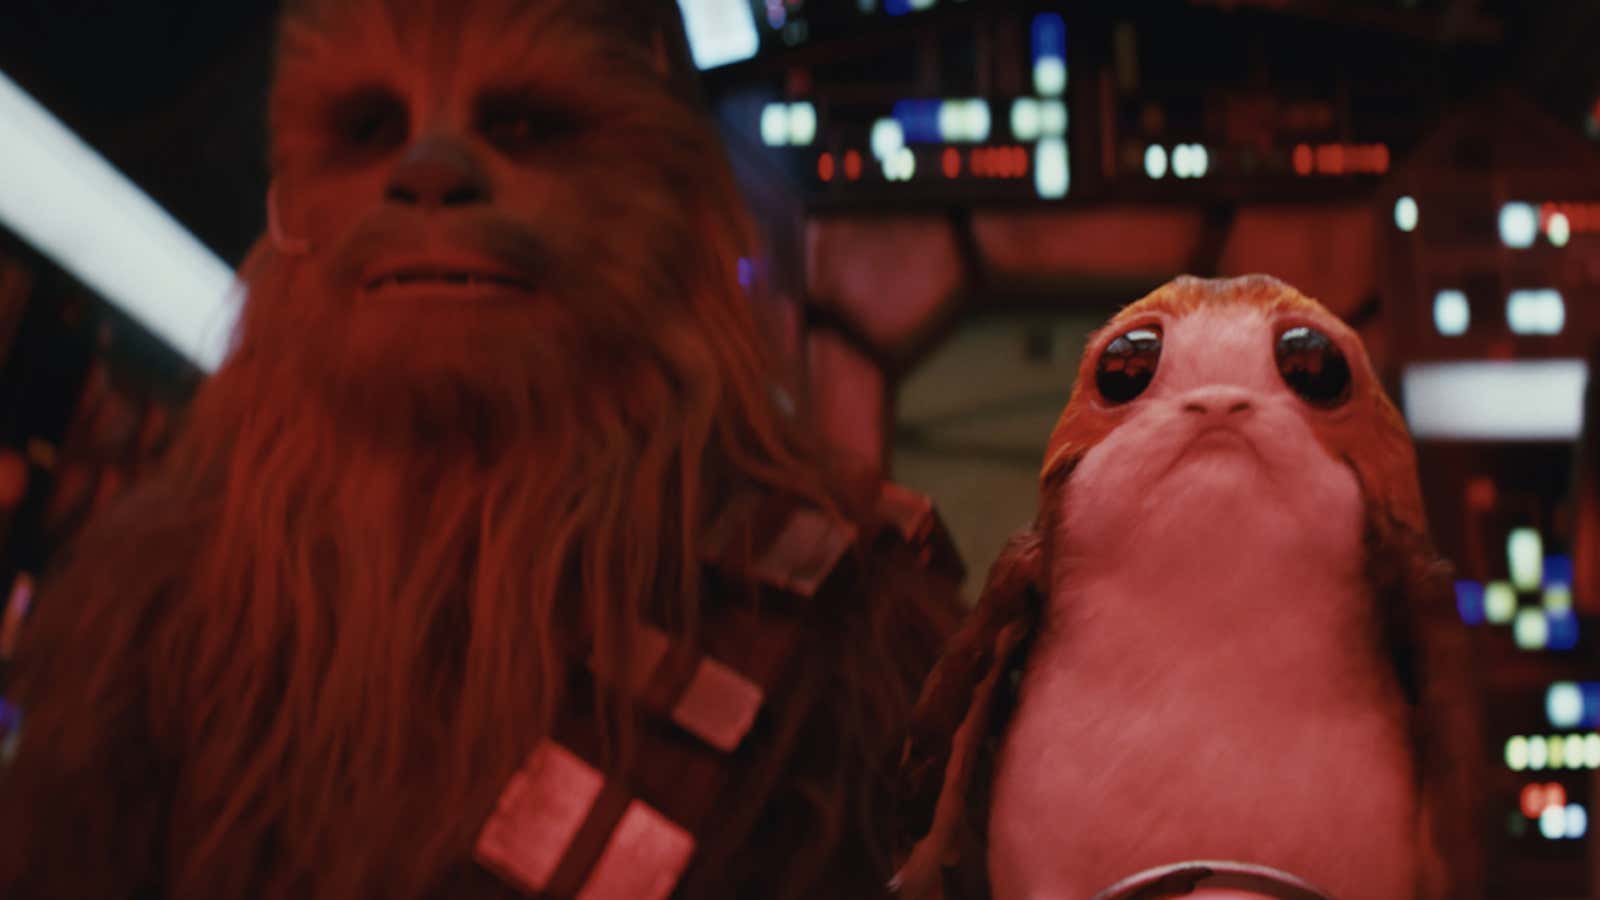 The porgs in Star Wars are a perfect example of natural selection